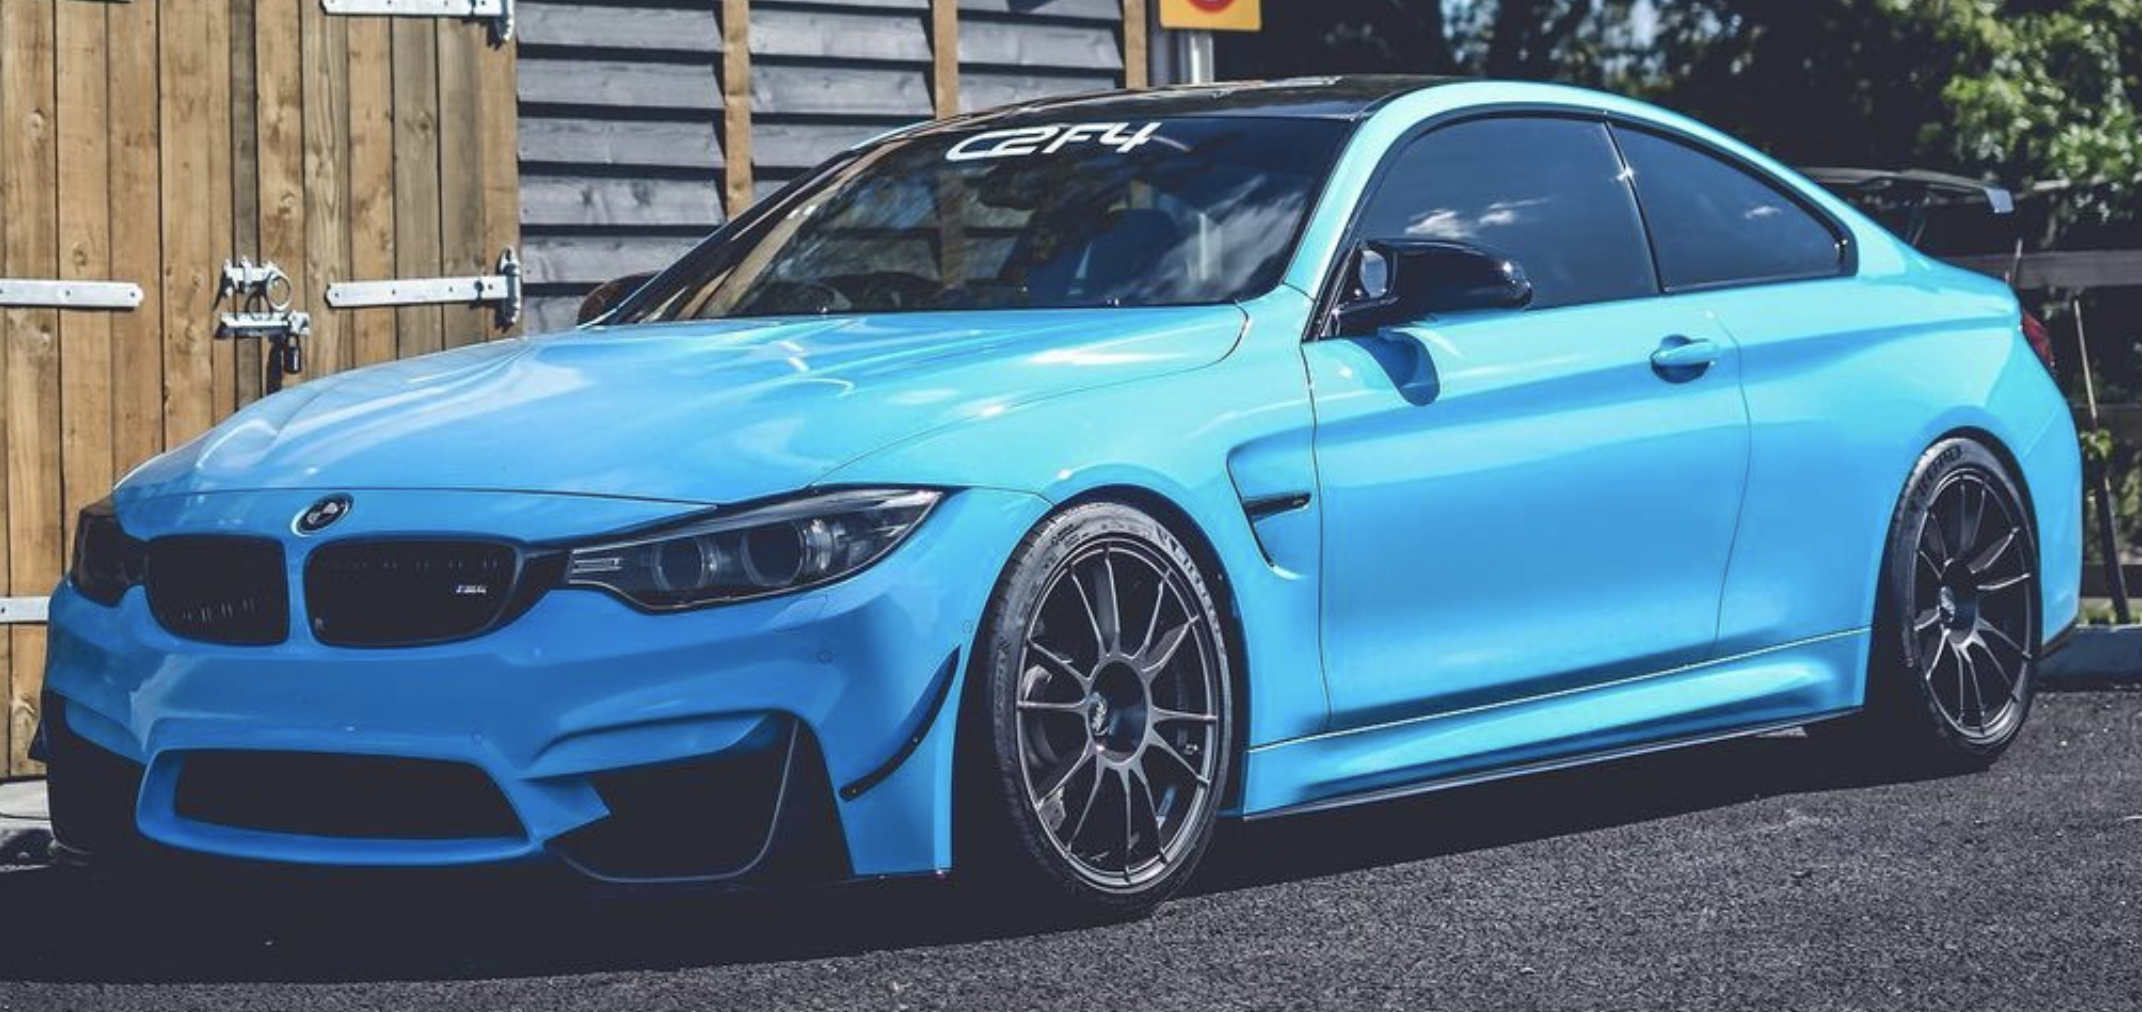 BMW M3/M4 F80/F82/F83 Carbon Fiber Front Bumper Canards are the complete solution to tune the handling for the front of a car aerodynamically. Made of lightweight and durable carbon graphite composites, Carbon Fiber Front Bumper Canards help increase front downforce at high speed.